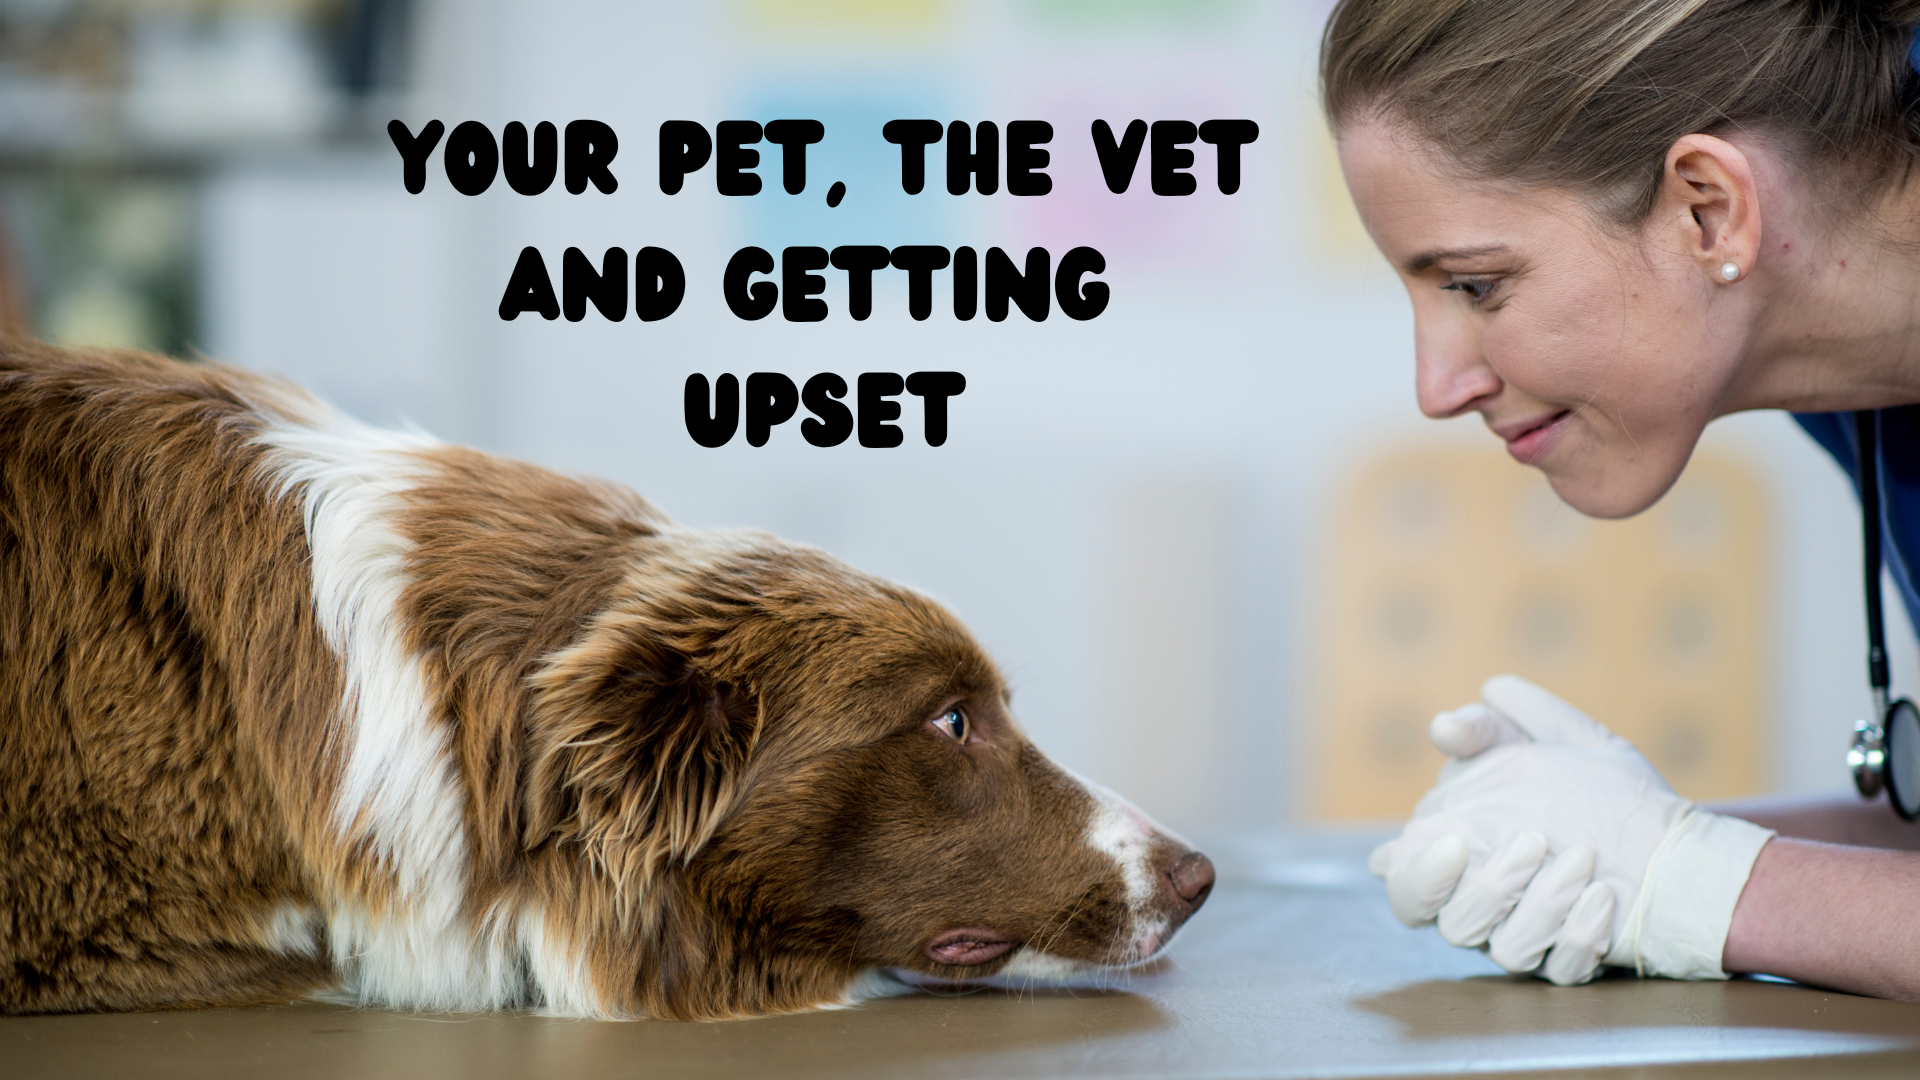 Your Pet, the Vet and Getting Upset